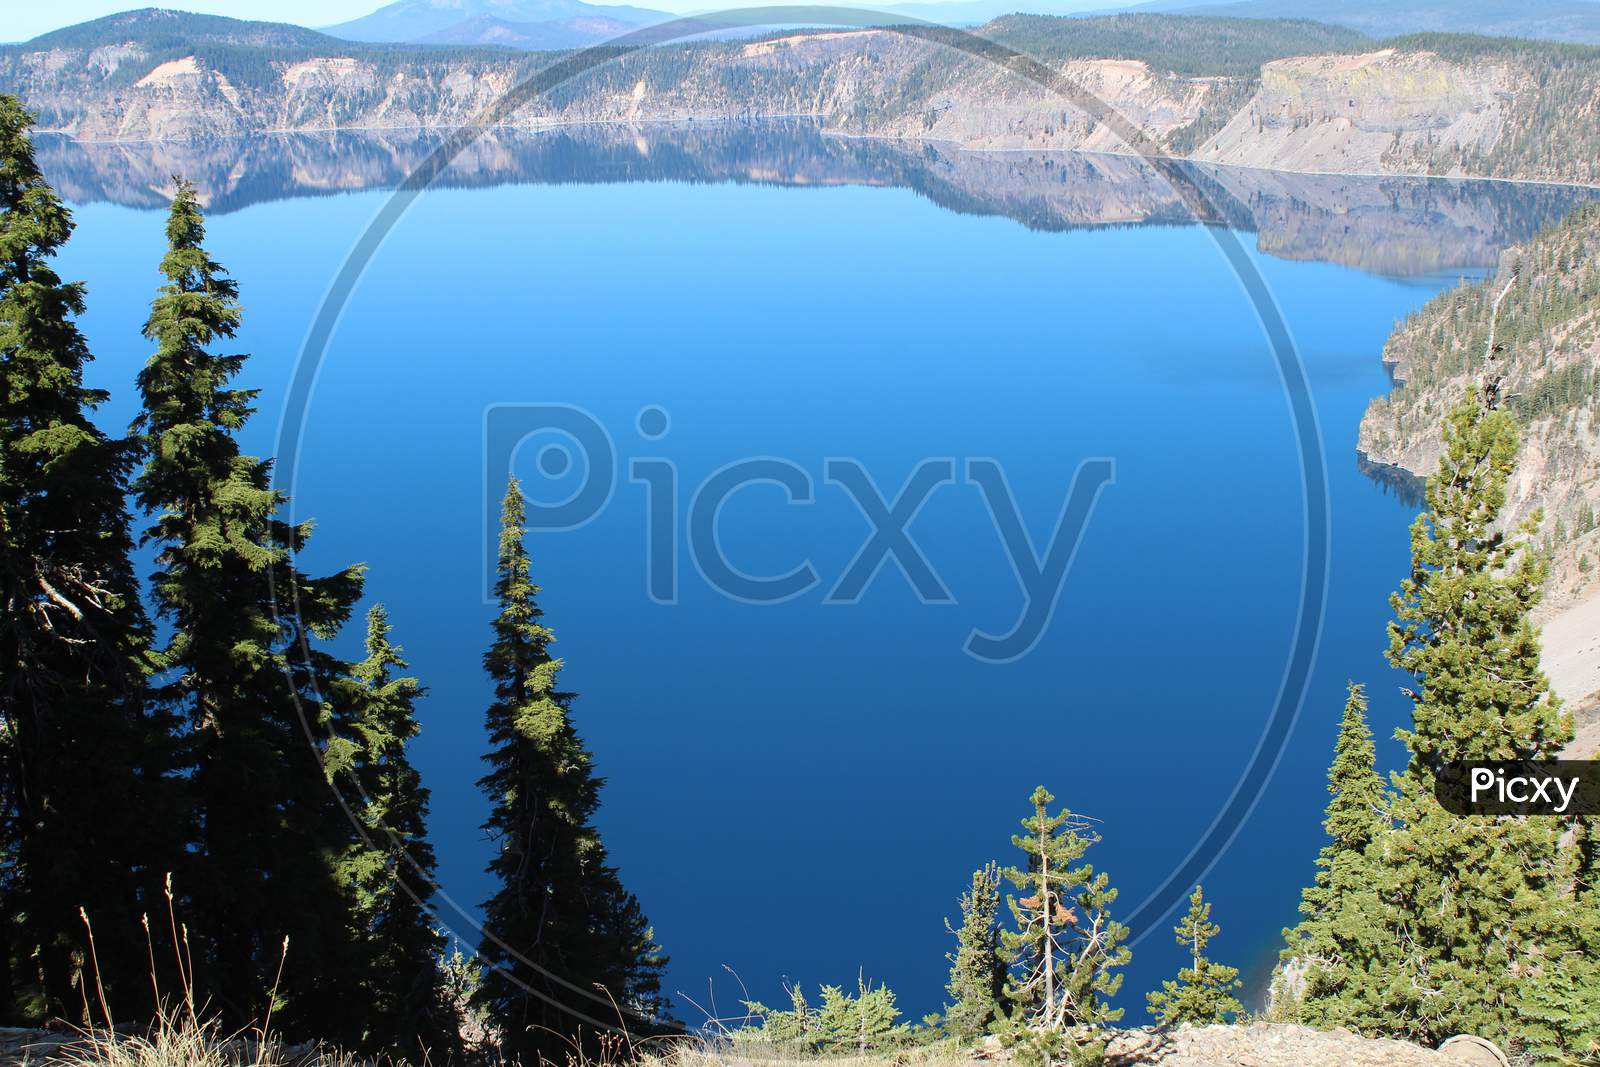 Crater Lake National Park (Or 01262)